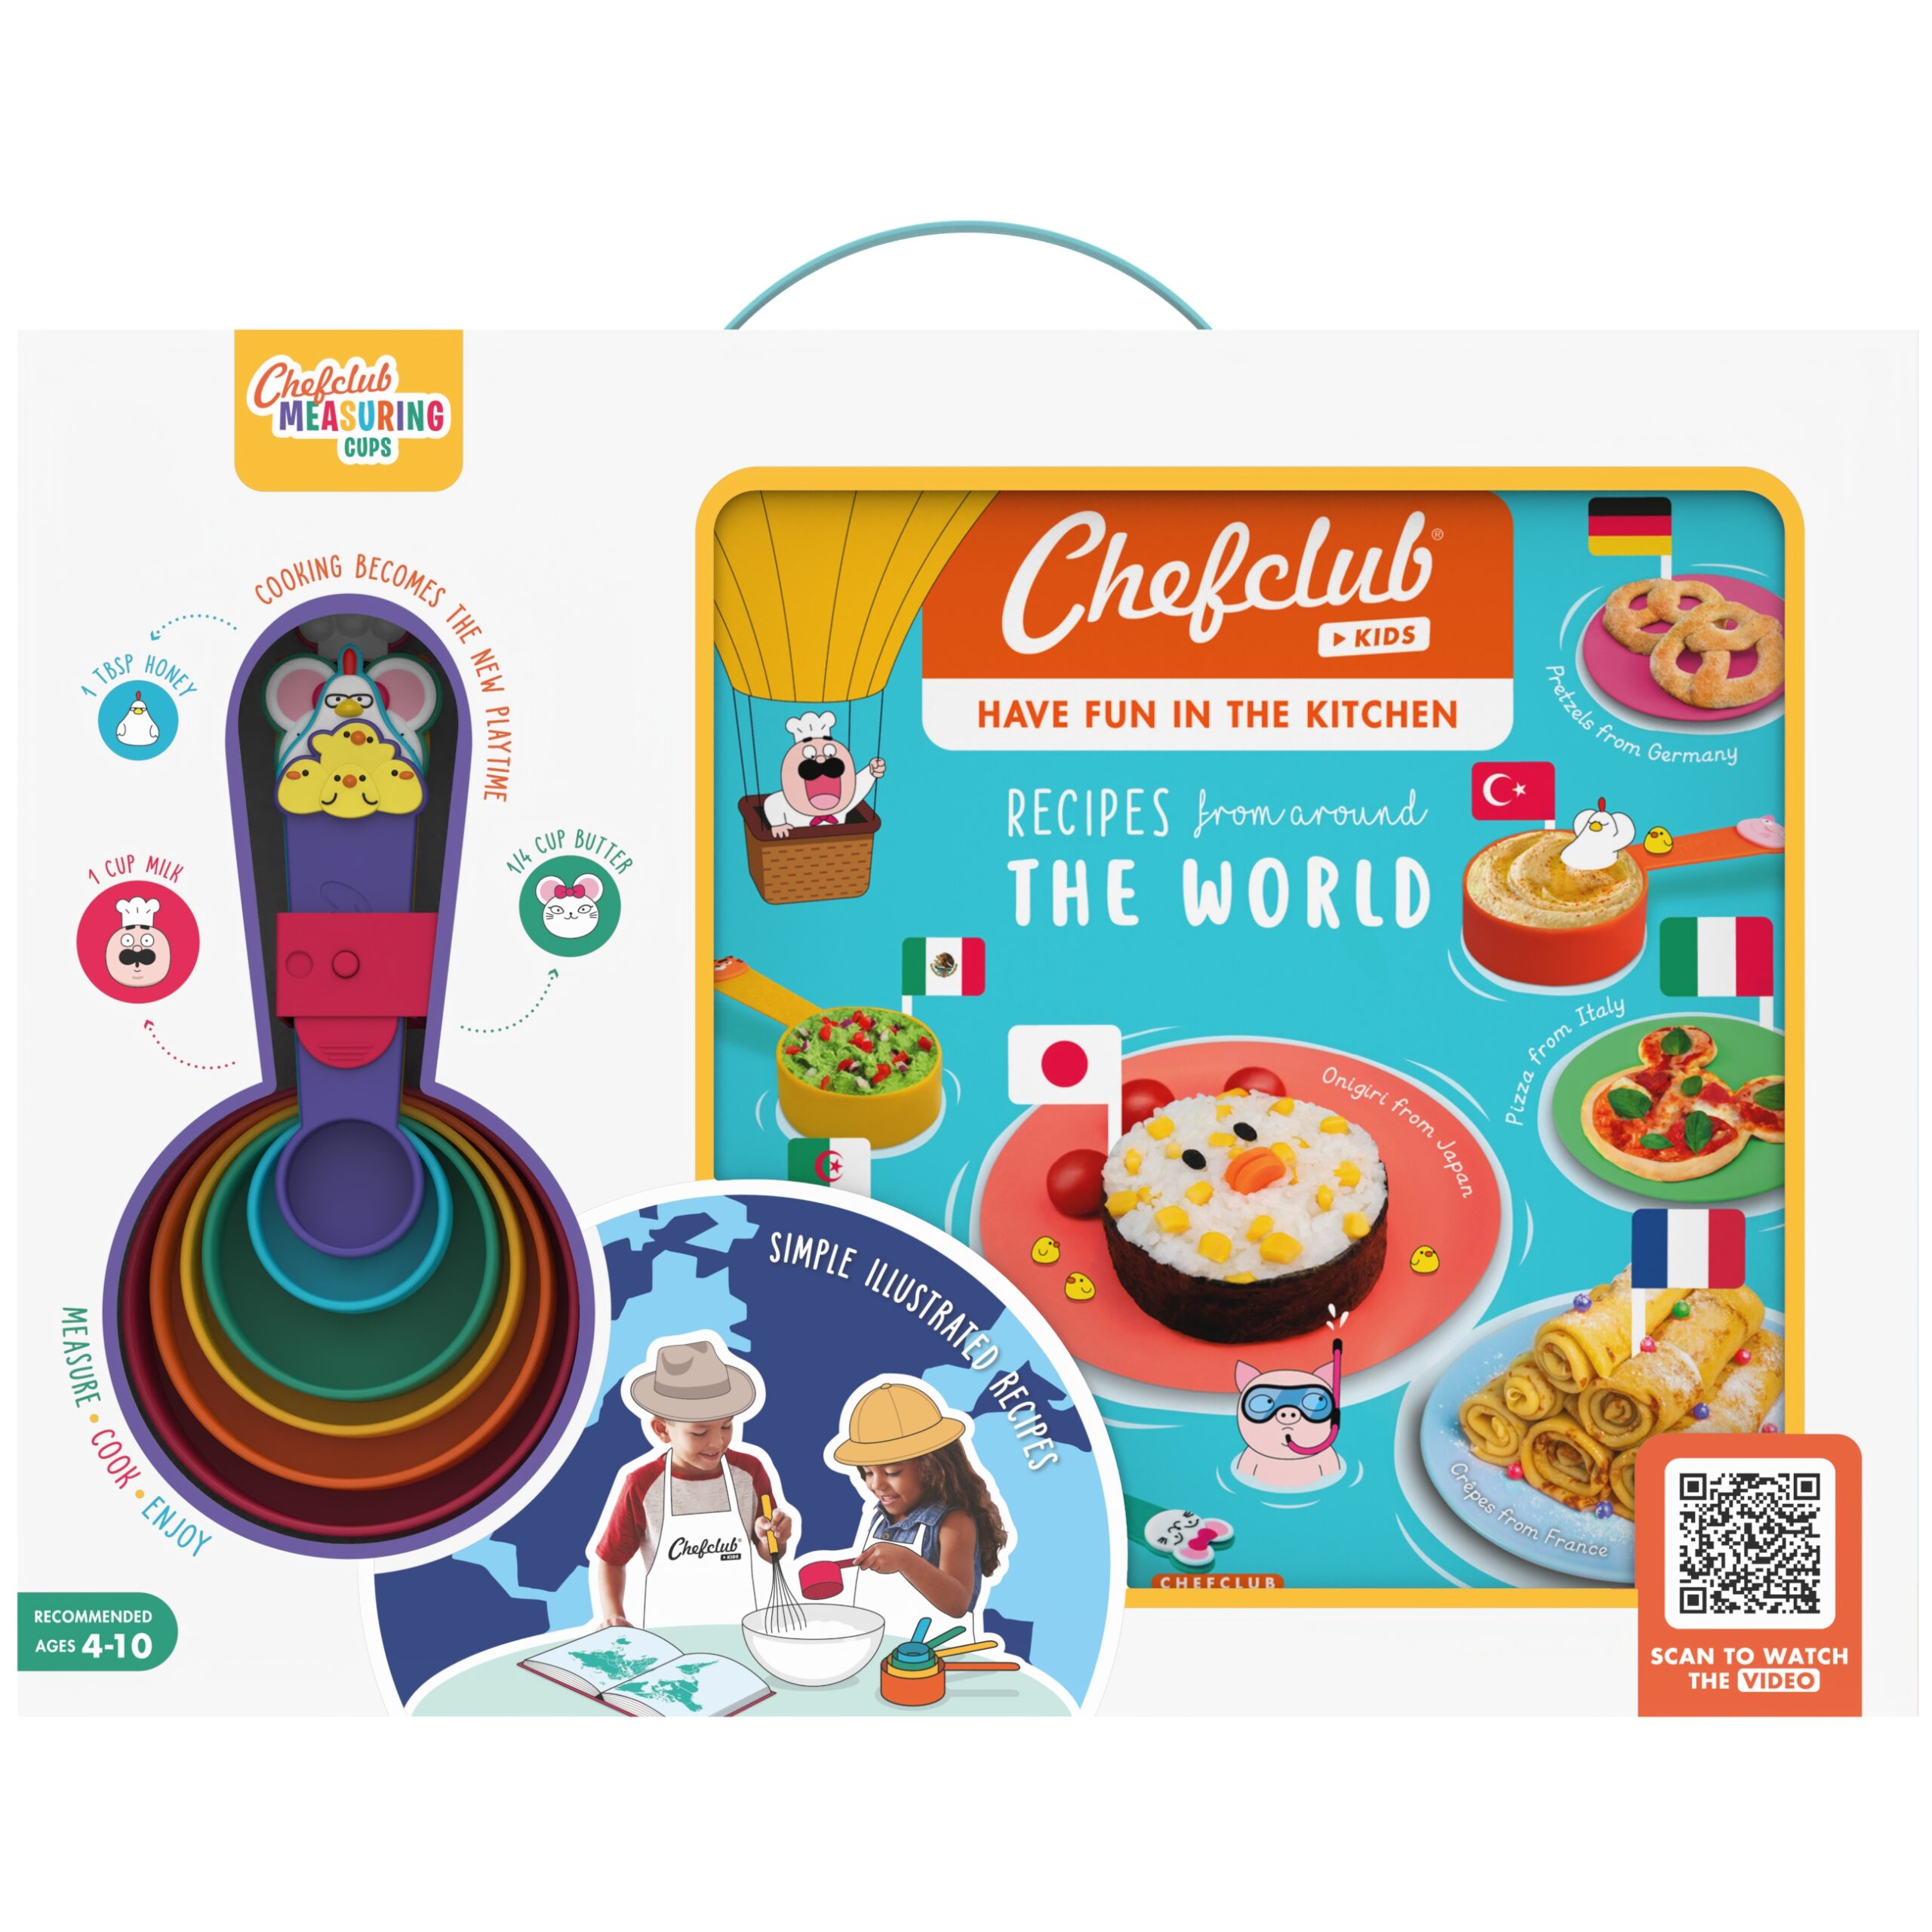 Five New Toy Partners for CHEFCLUB